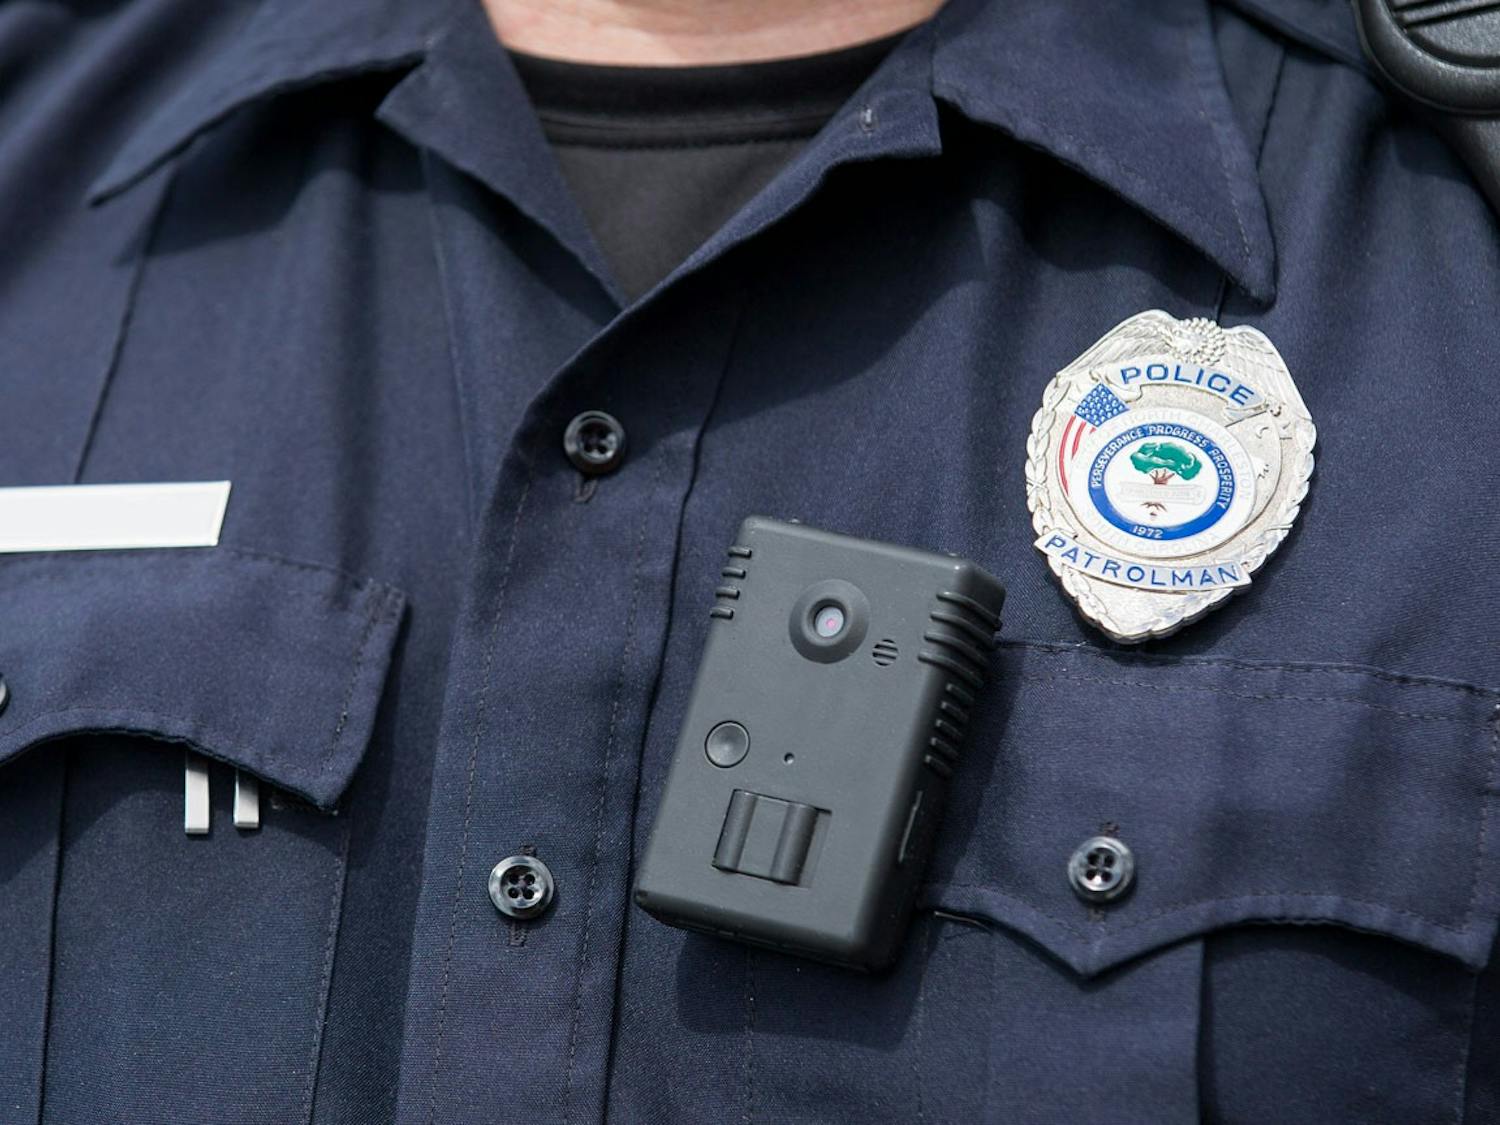 Police Officer wearing a body camera